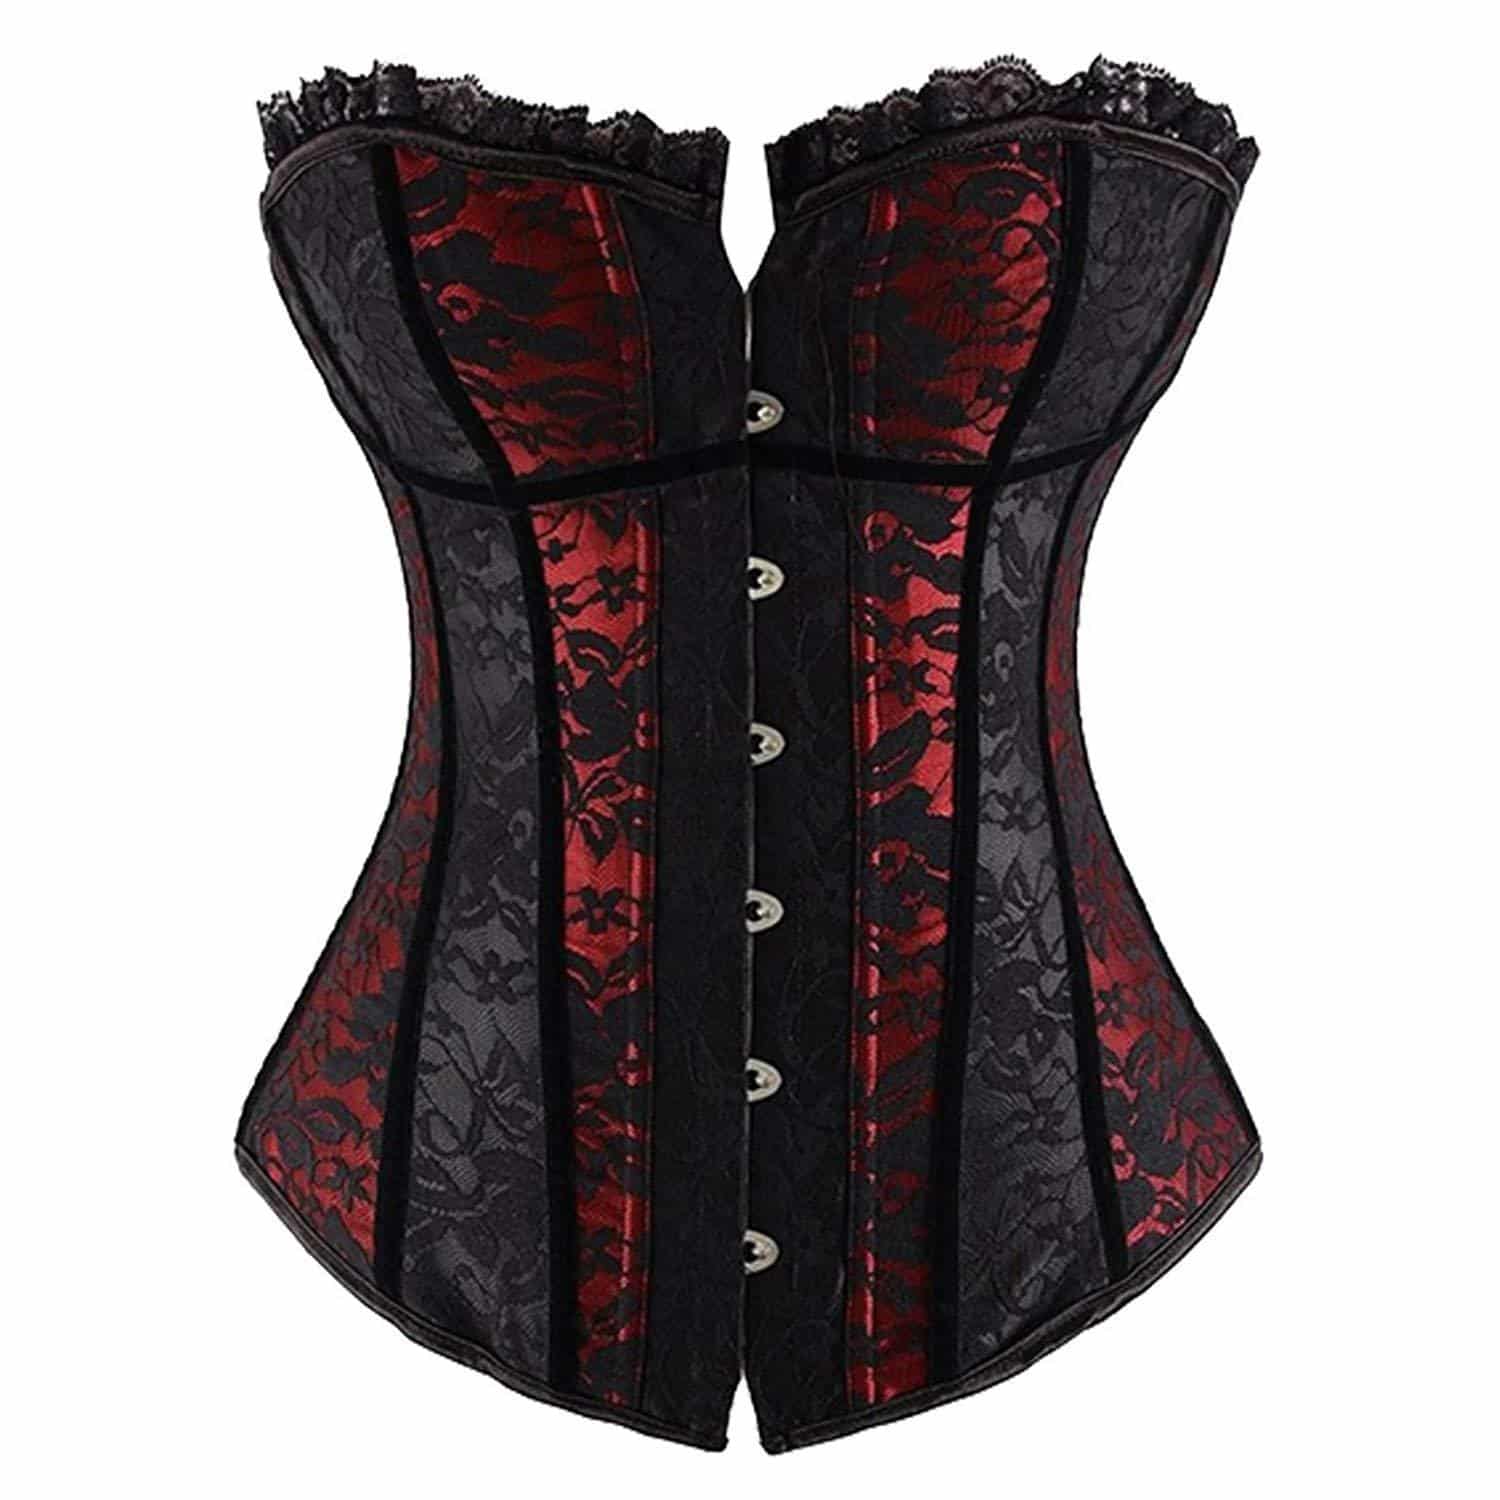 Seductive Black and Red Kinky Gothic Corset Red